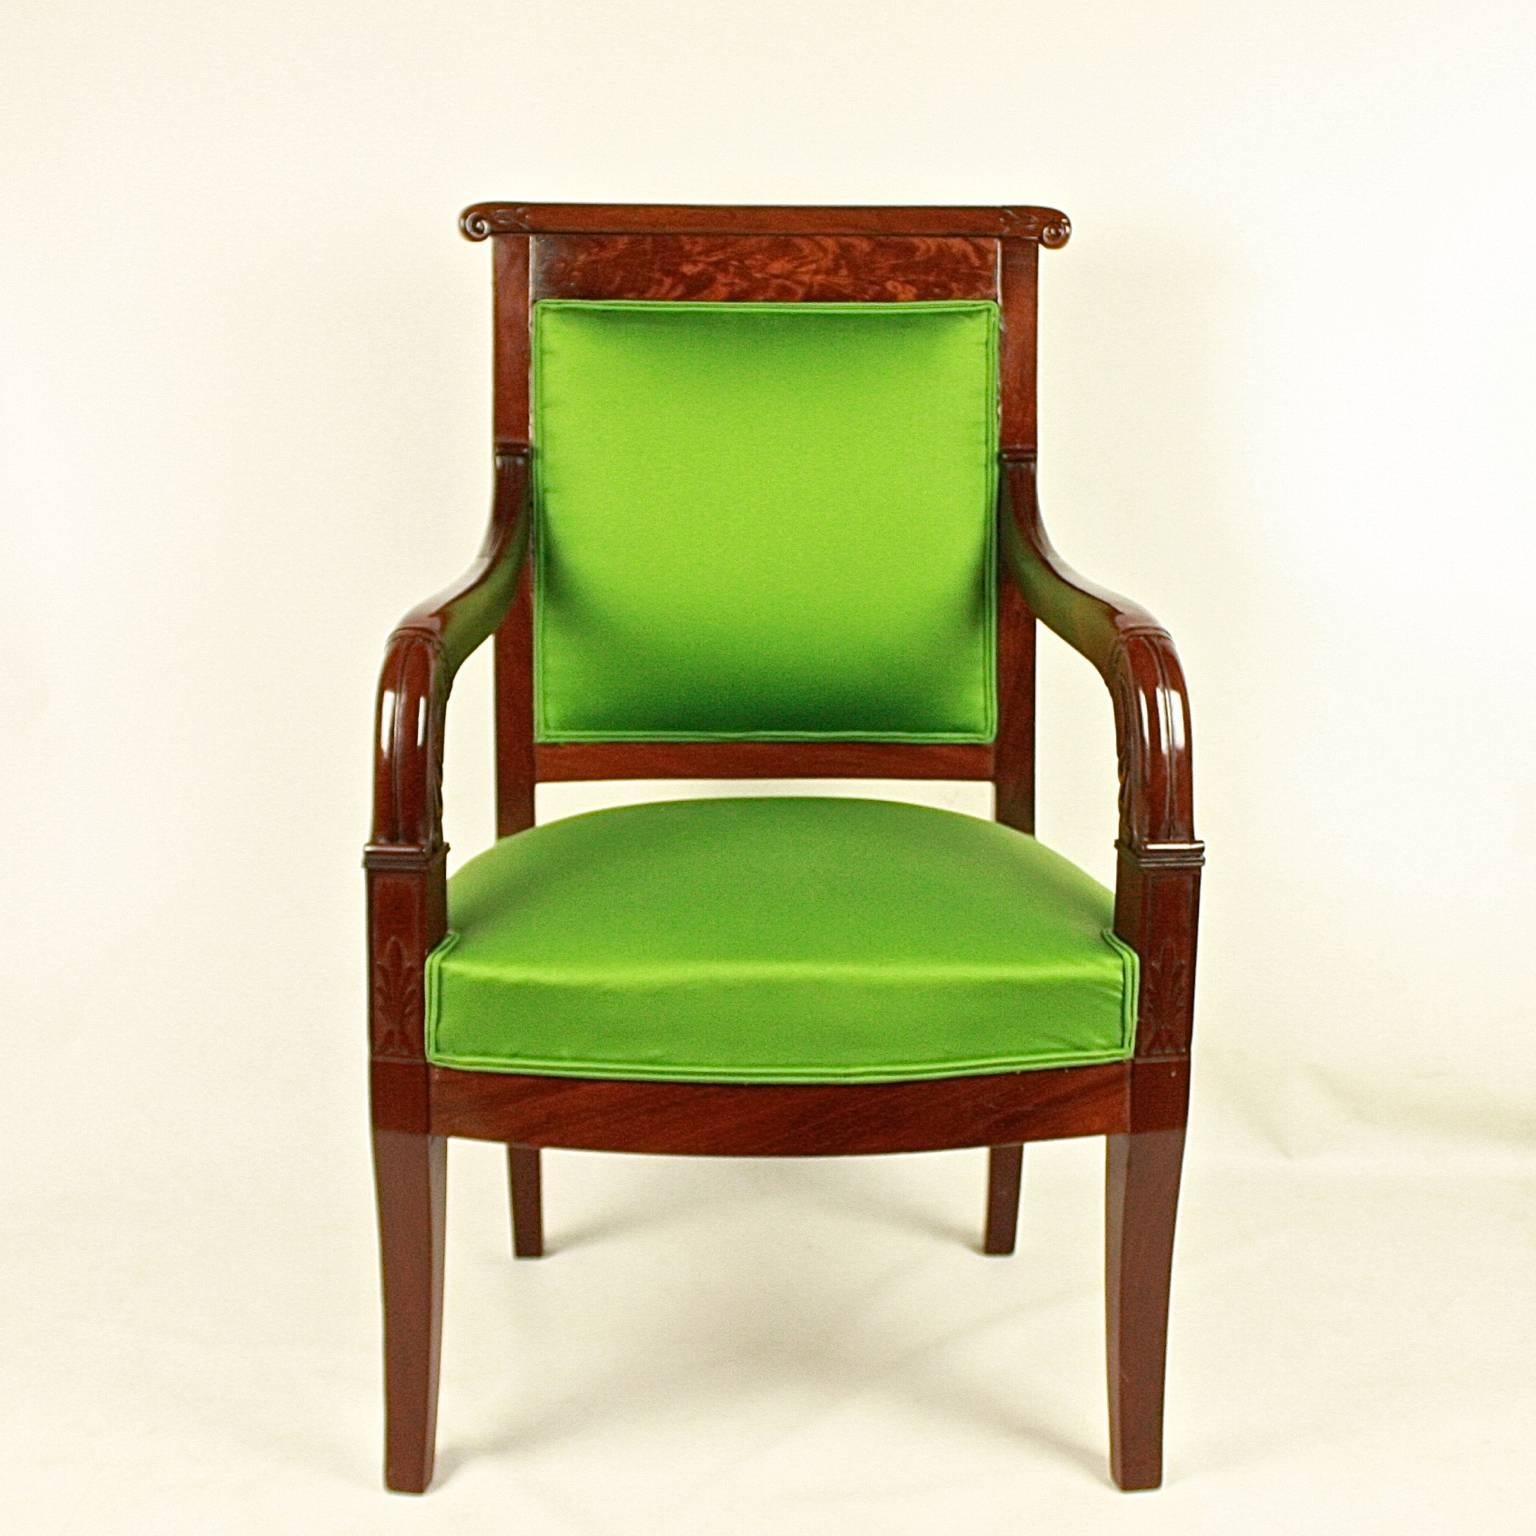 A pair of Empire mahogany fauteuils or armchair 'a la Reine' in the manner of Jacob-Desmalter/ François-Honoré-Georges Jacob Desmalter (1770-1841, son of Jacob Desmalter), newly upholstered in fine green sateen from Manuel Canovas.
A mahogany frame